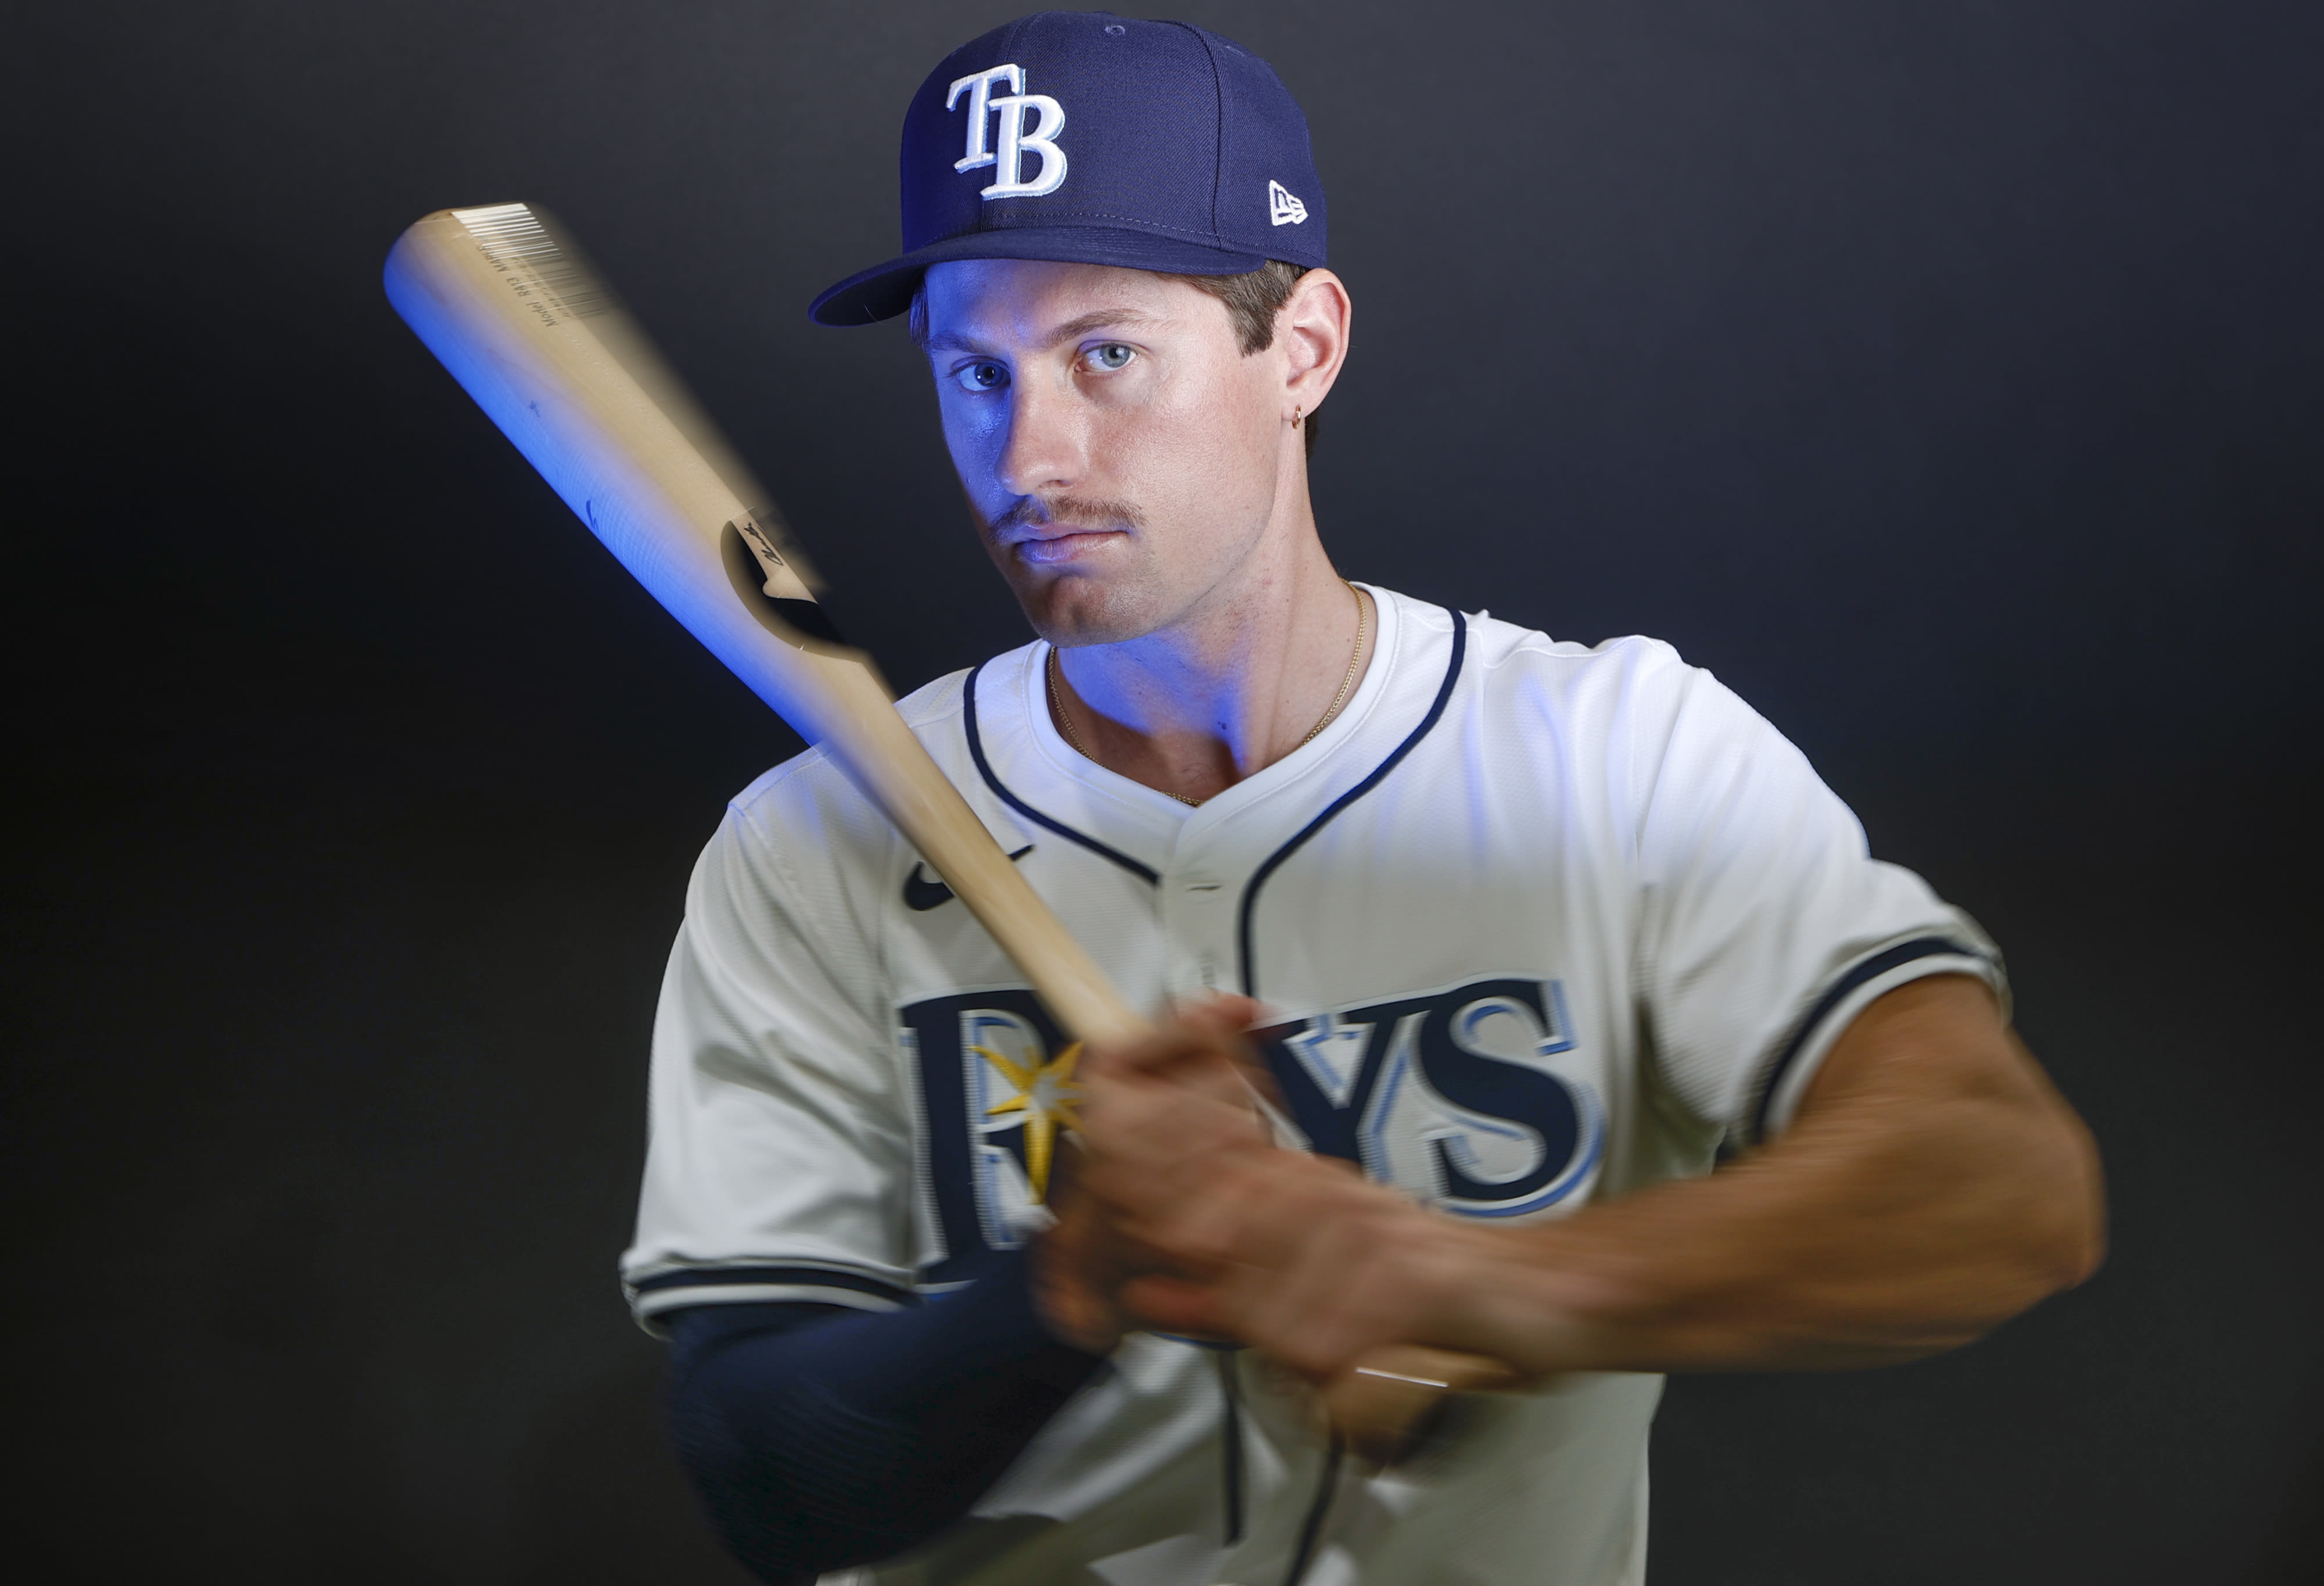 Jonny DeLuca has been very good for the Rays. He’s a lot of fun, too